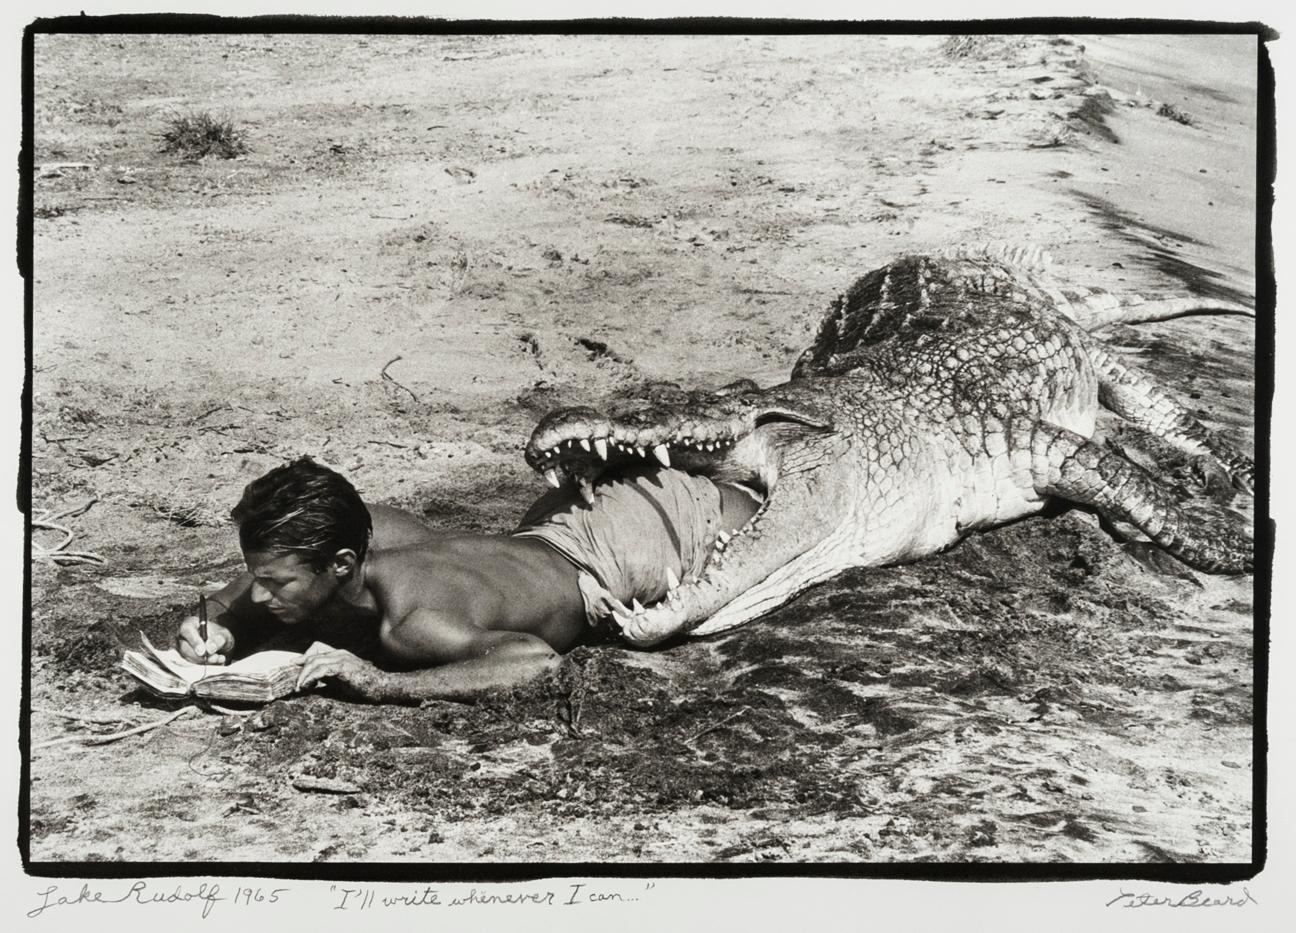 Peter Beard Black and White Photograph - I'll write whenever I can..., 1965